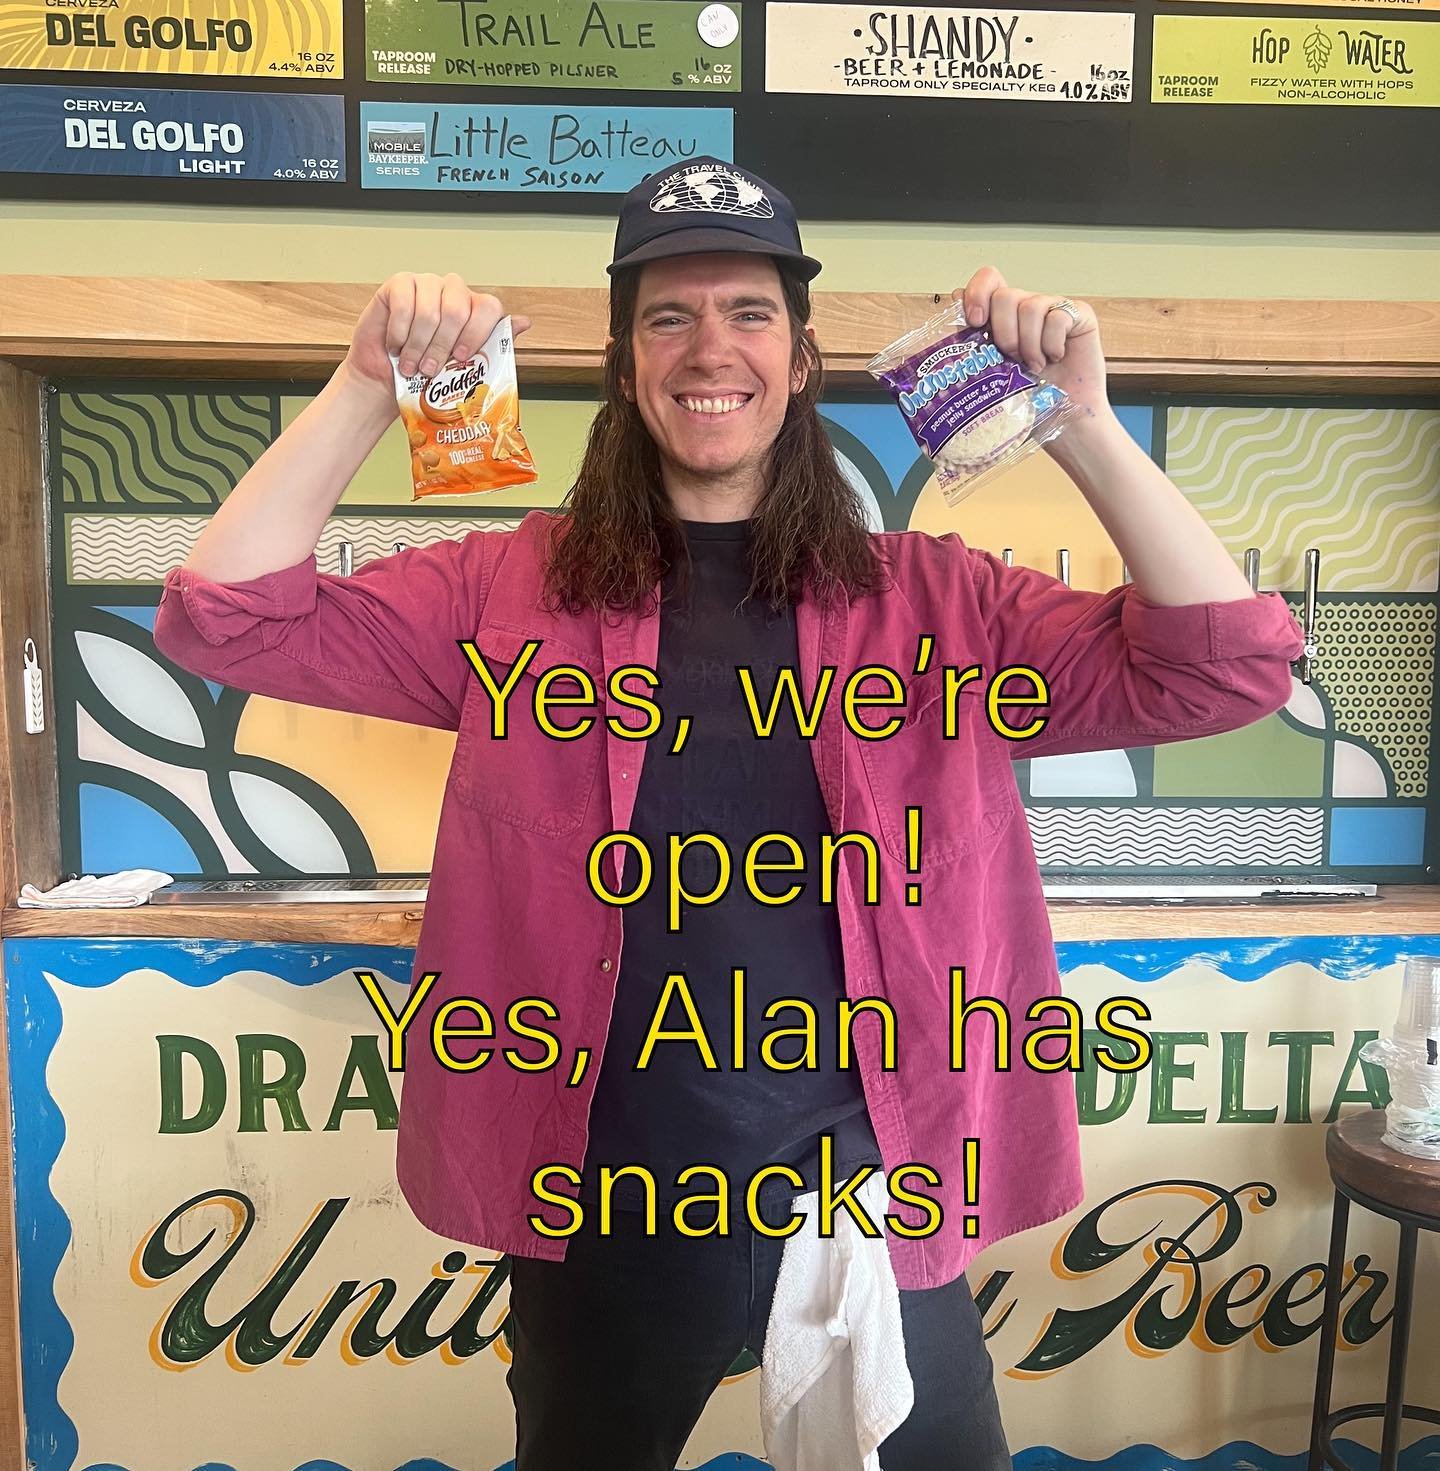 Don&rsquo;t let a little rain ruin your After School Snacks with Alan! 

Yes, we&rsquo;re open! Yes, Alan has snacks! 

Todays menu is:

Uncrustables
Goldfish Crackers
Gushers